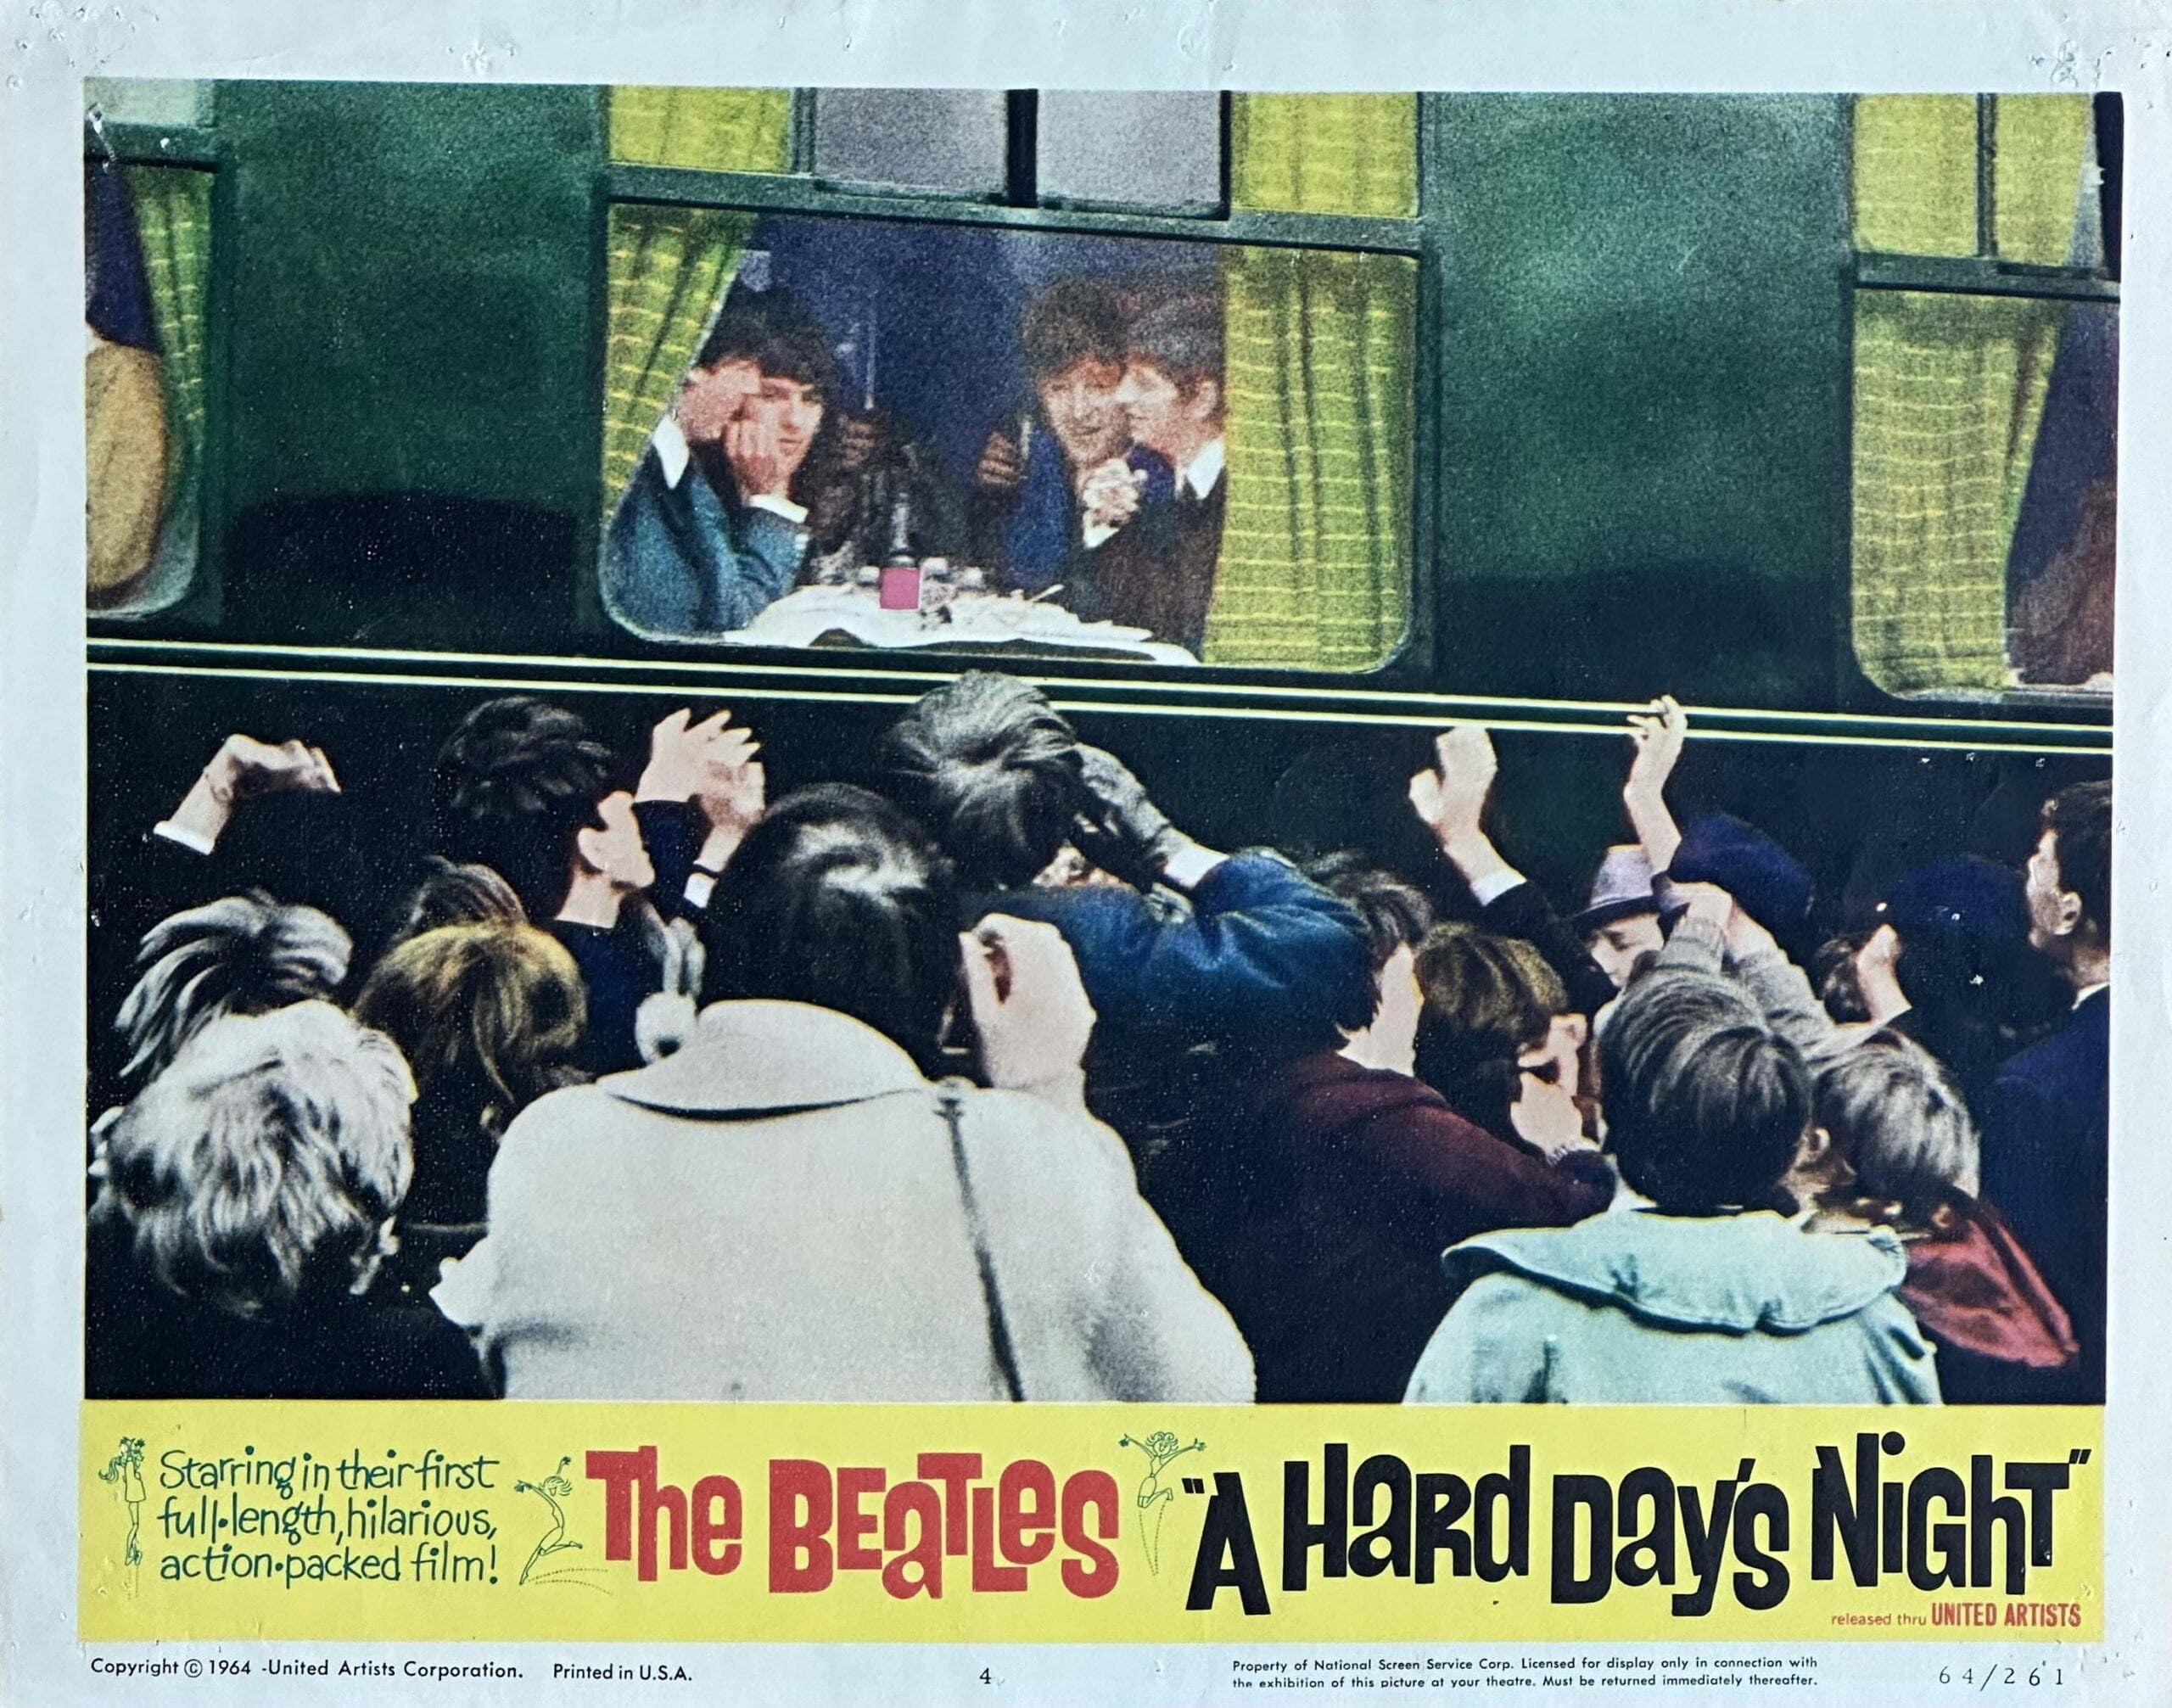 Original vintage cinema lobby card movie poster for A Hard Day's Night, starring The Beatles